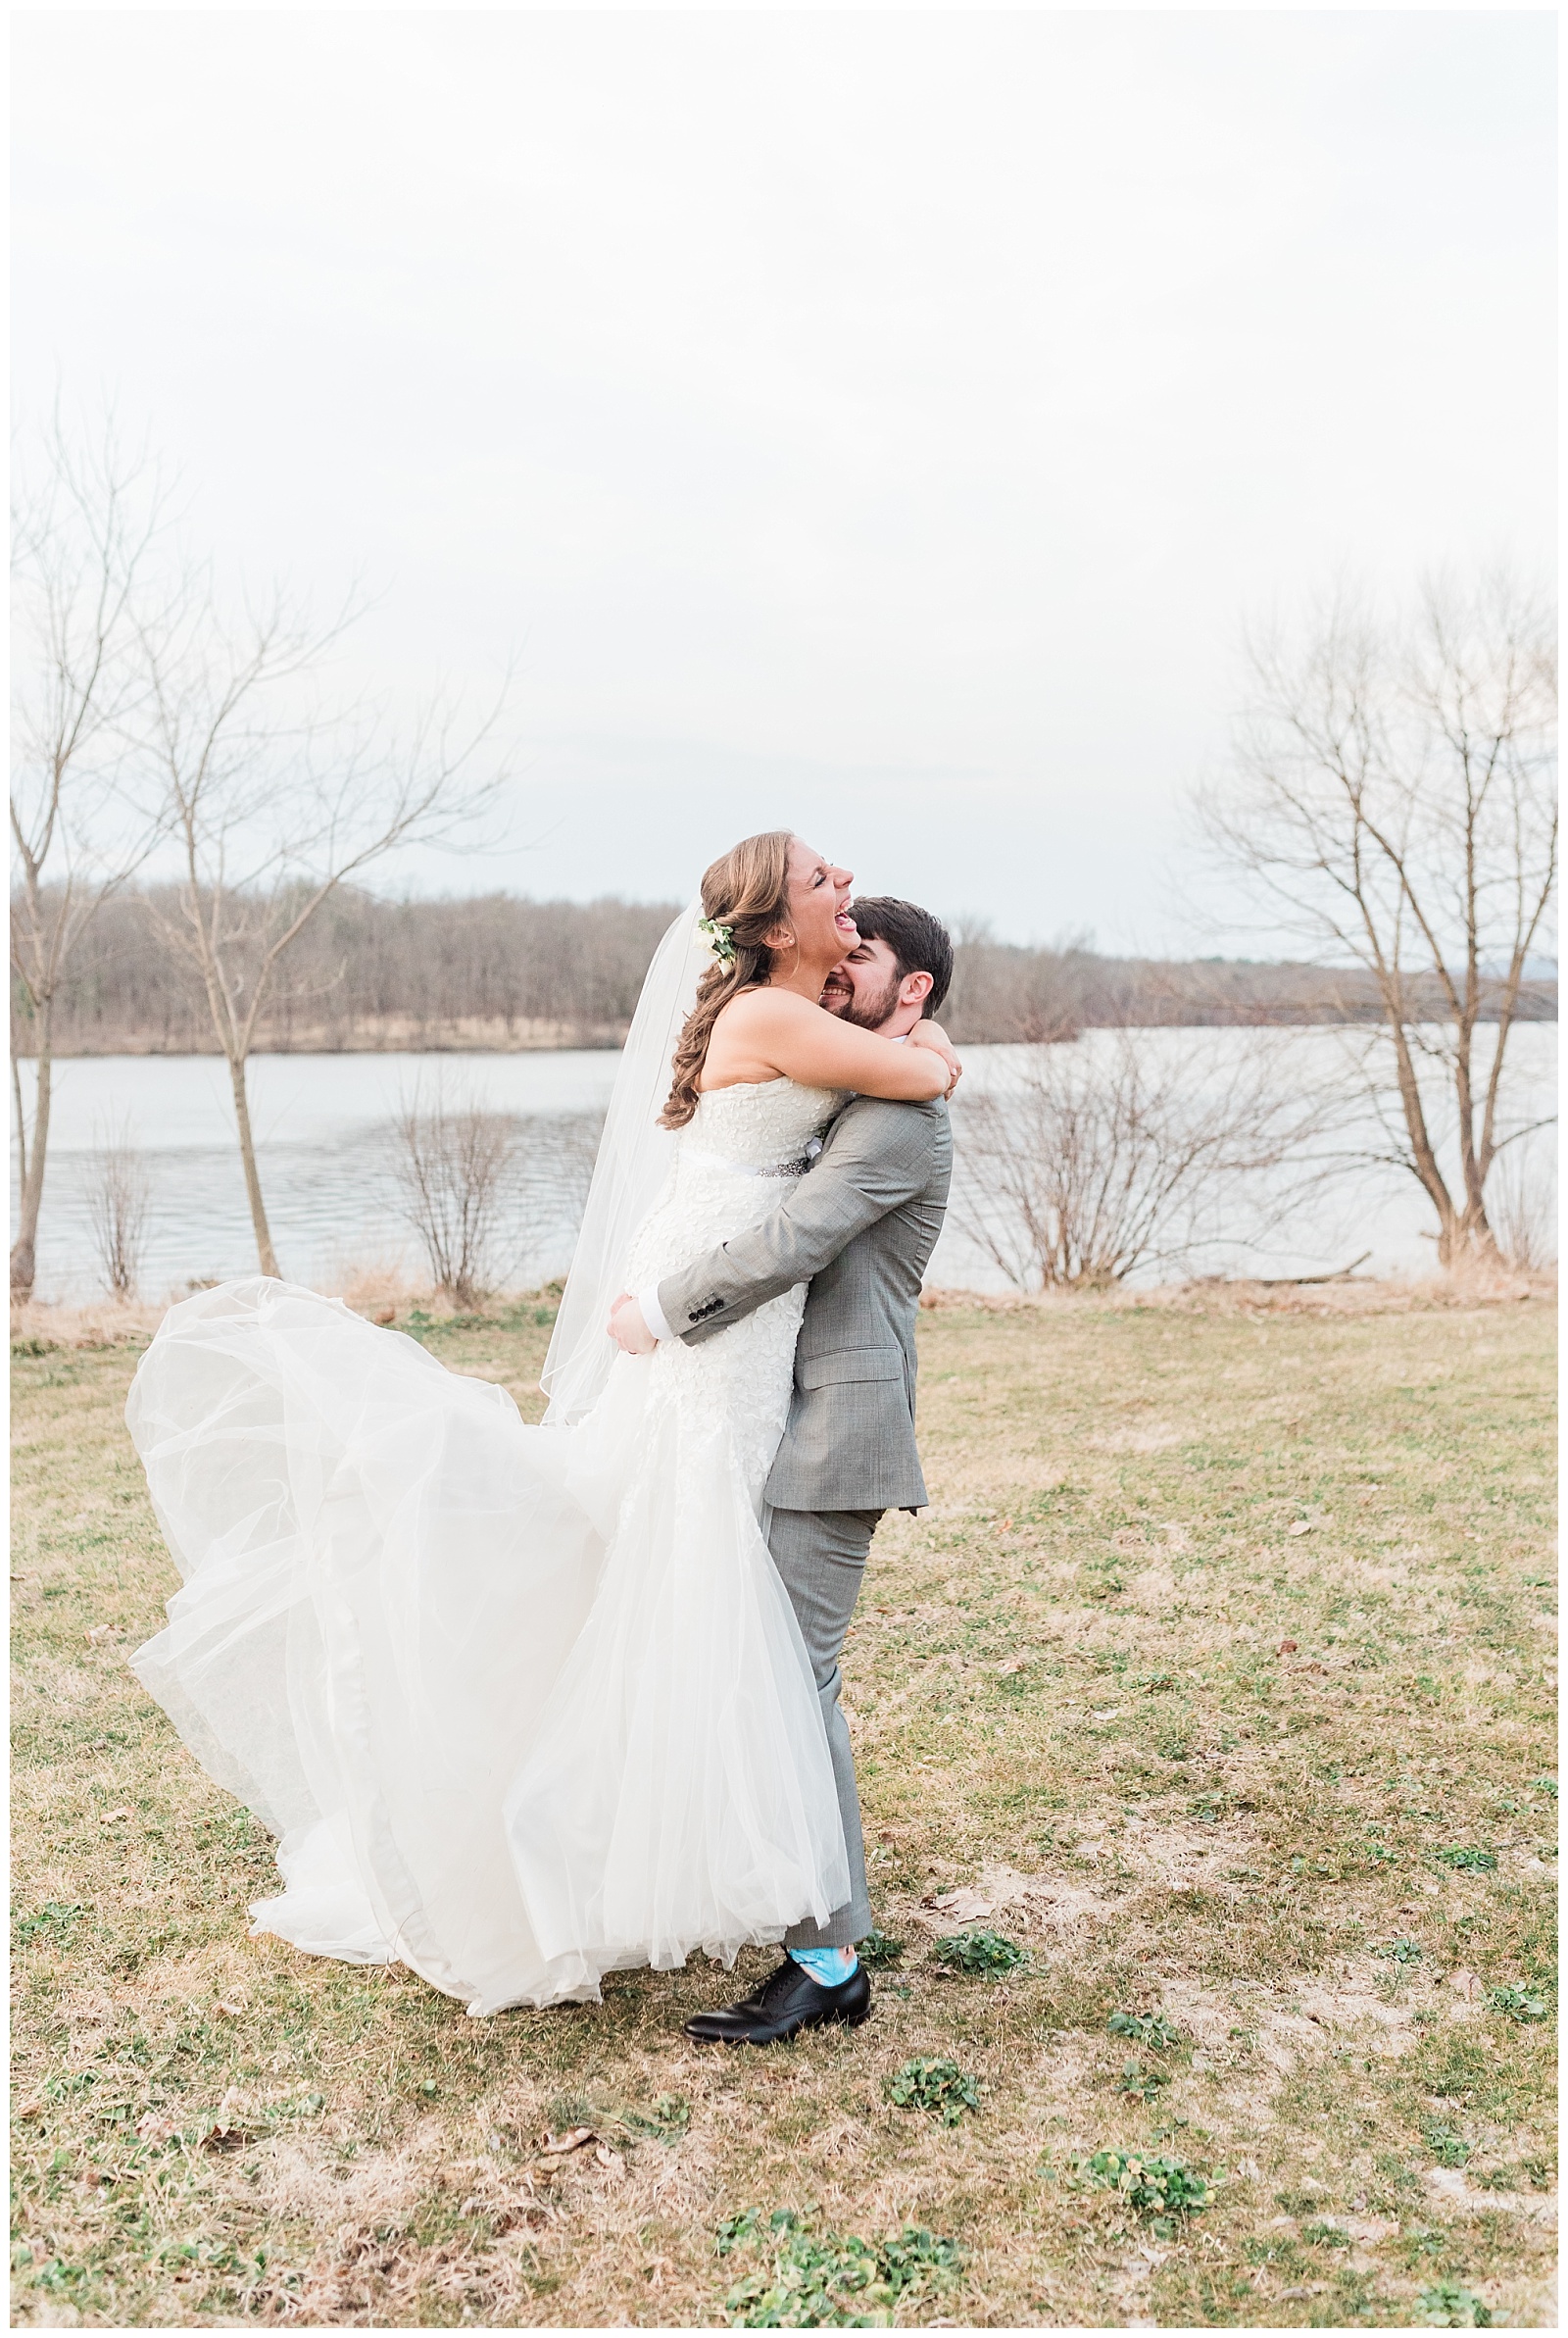 Bride laughs as the groom lifts her up in front of a lake, and she kicks up her Mark Zunino wedding gown.